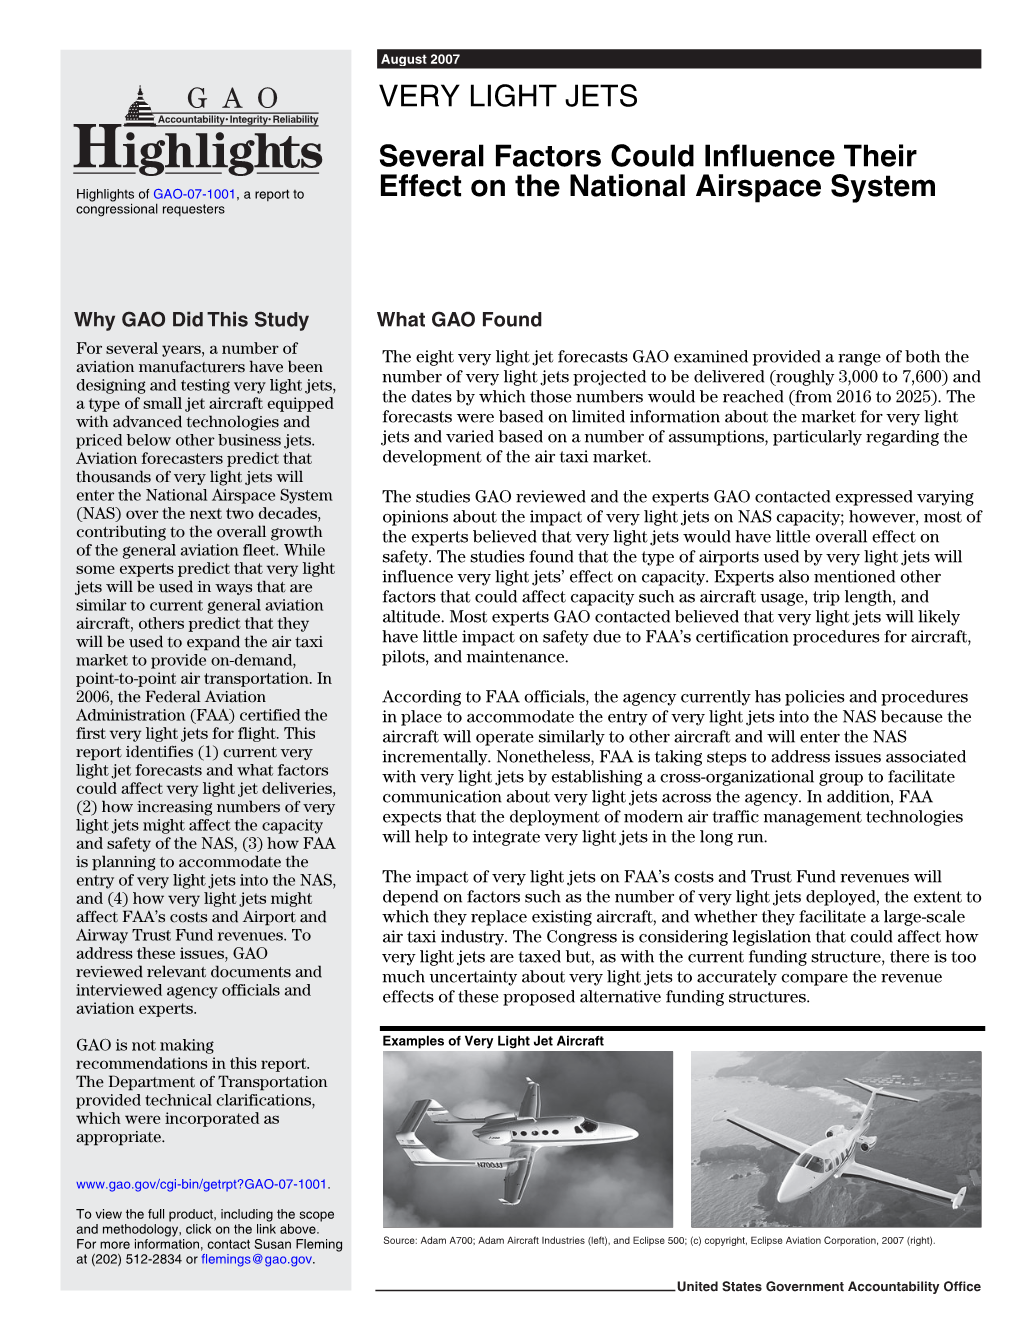 GAO-07-1001 Highlights, VERY LIGHT JETS: Several Factors Could